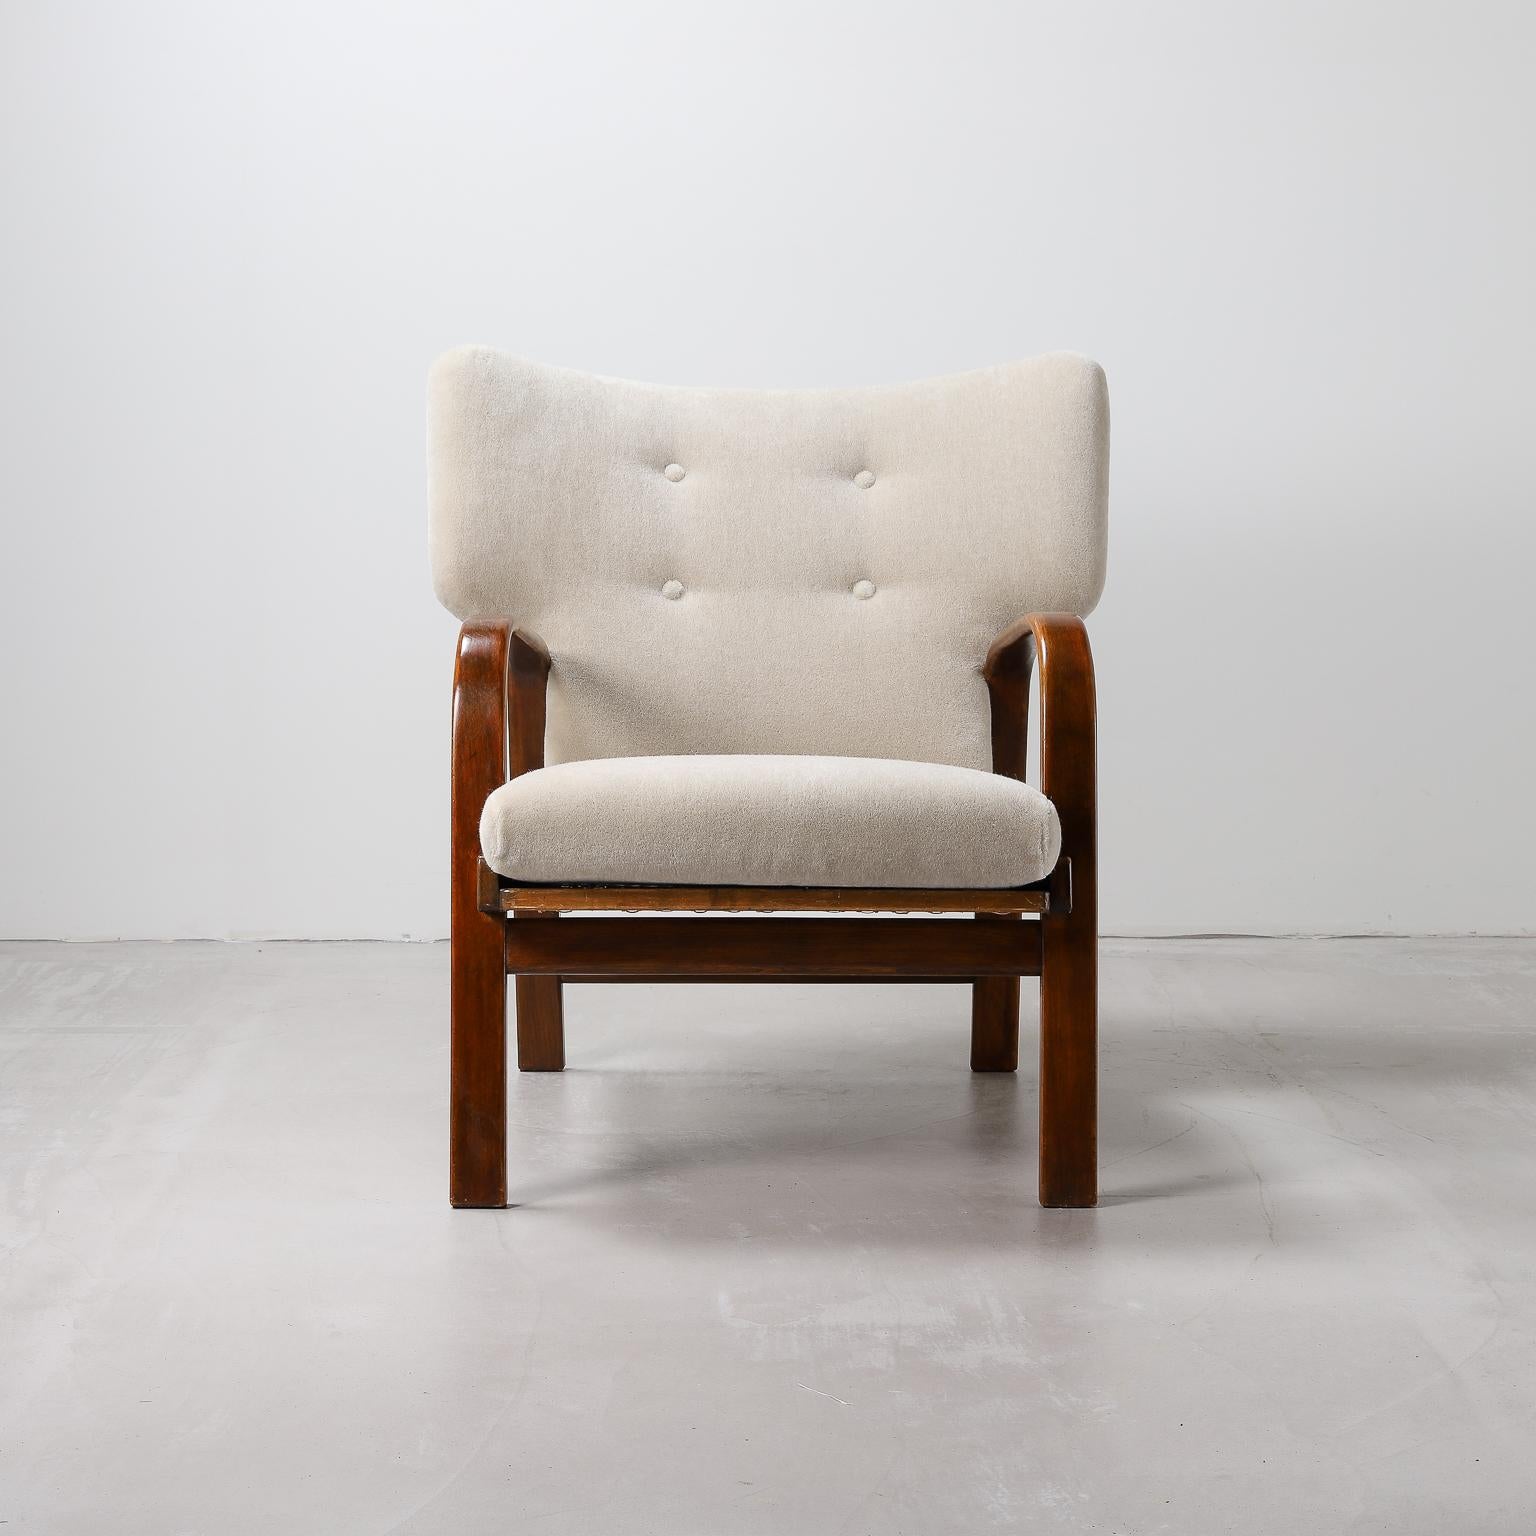 Easy armchair with mohair upholstery designed by Magnus Stephensen produced by Danish Manufacterer Fritz Hansen.